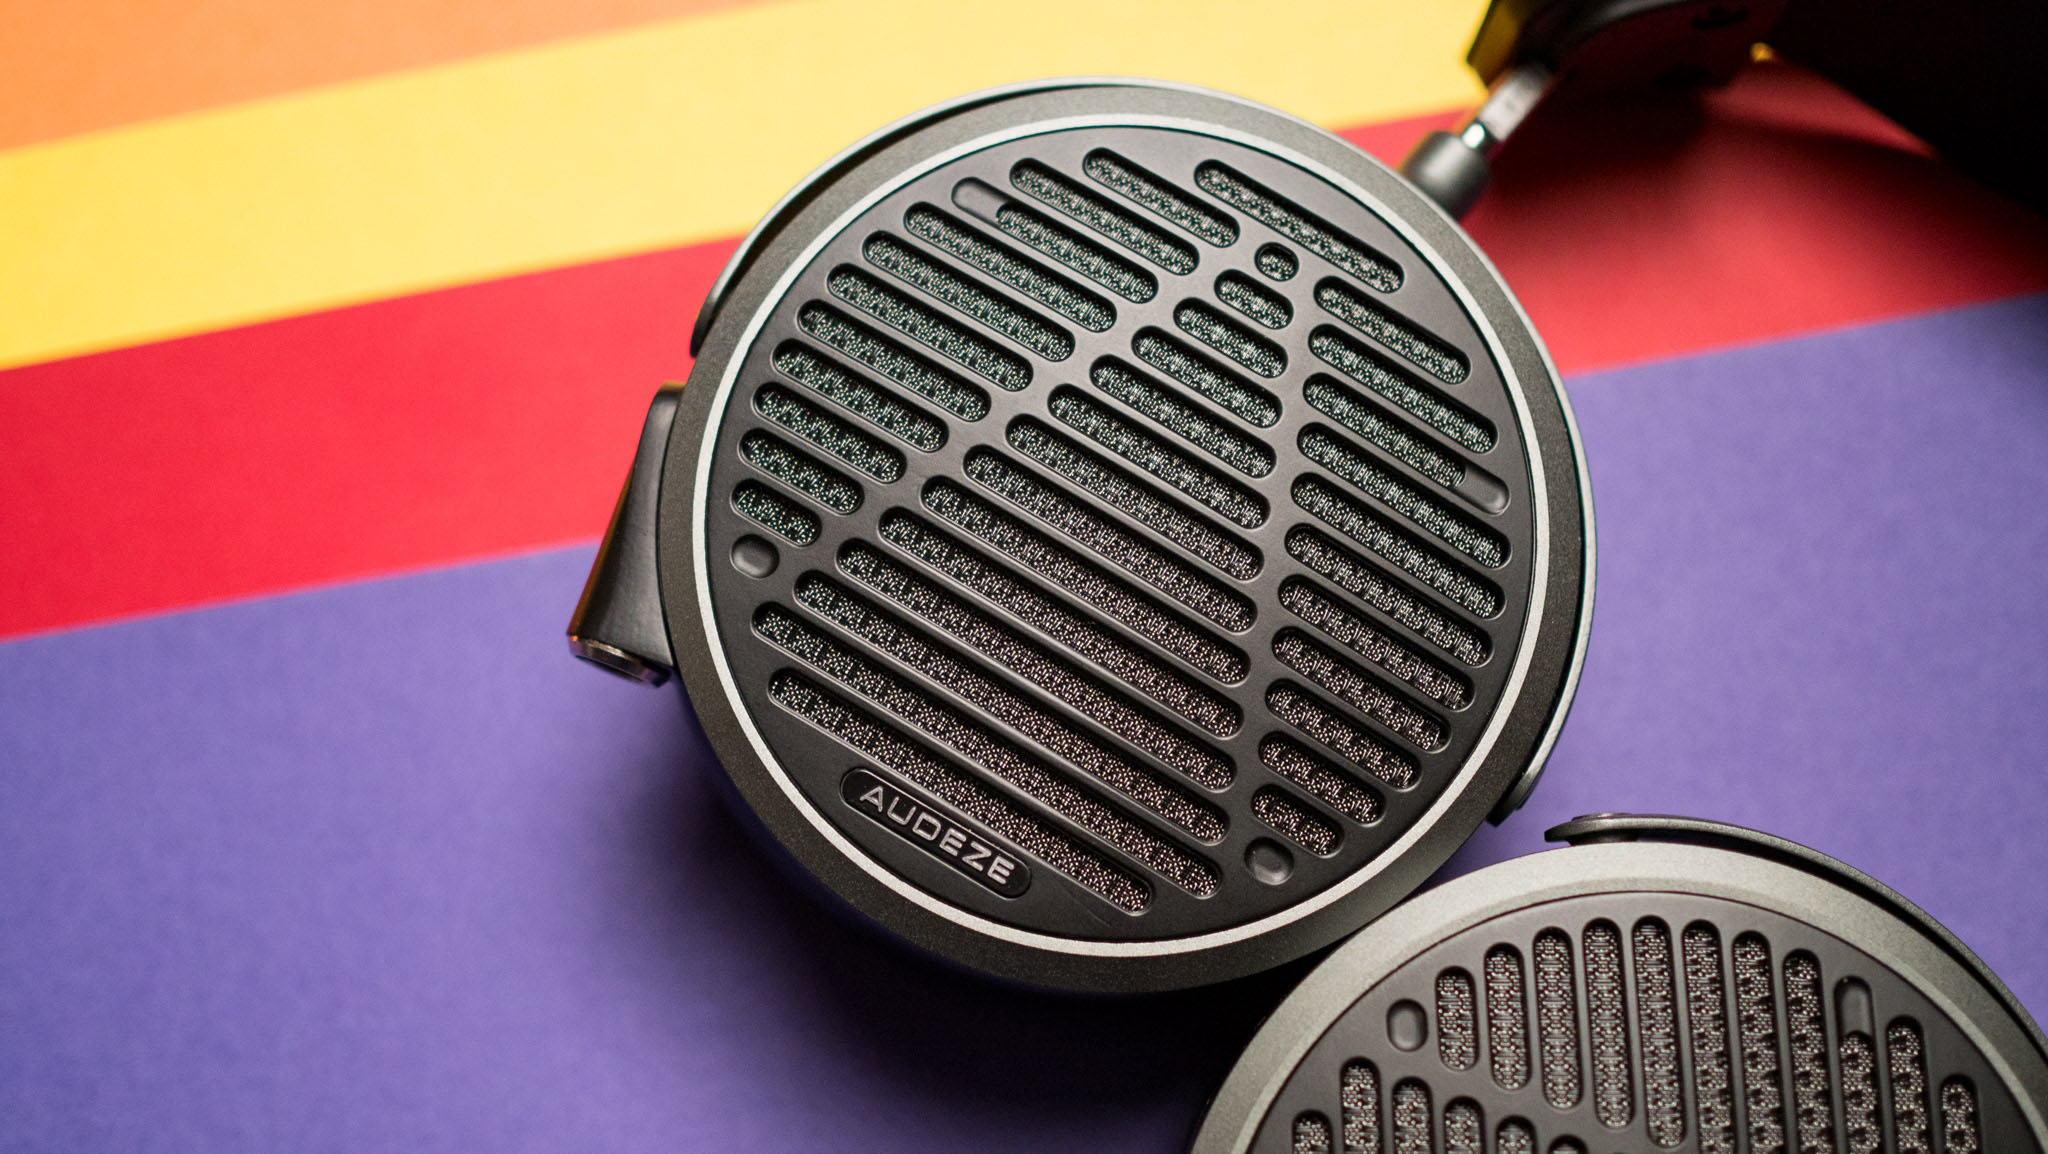 Grille design of the Audeze MM-500